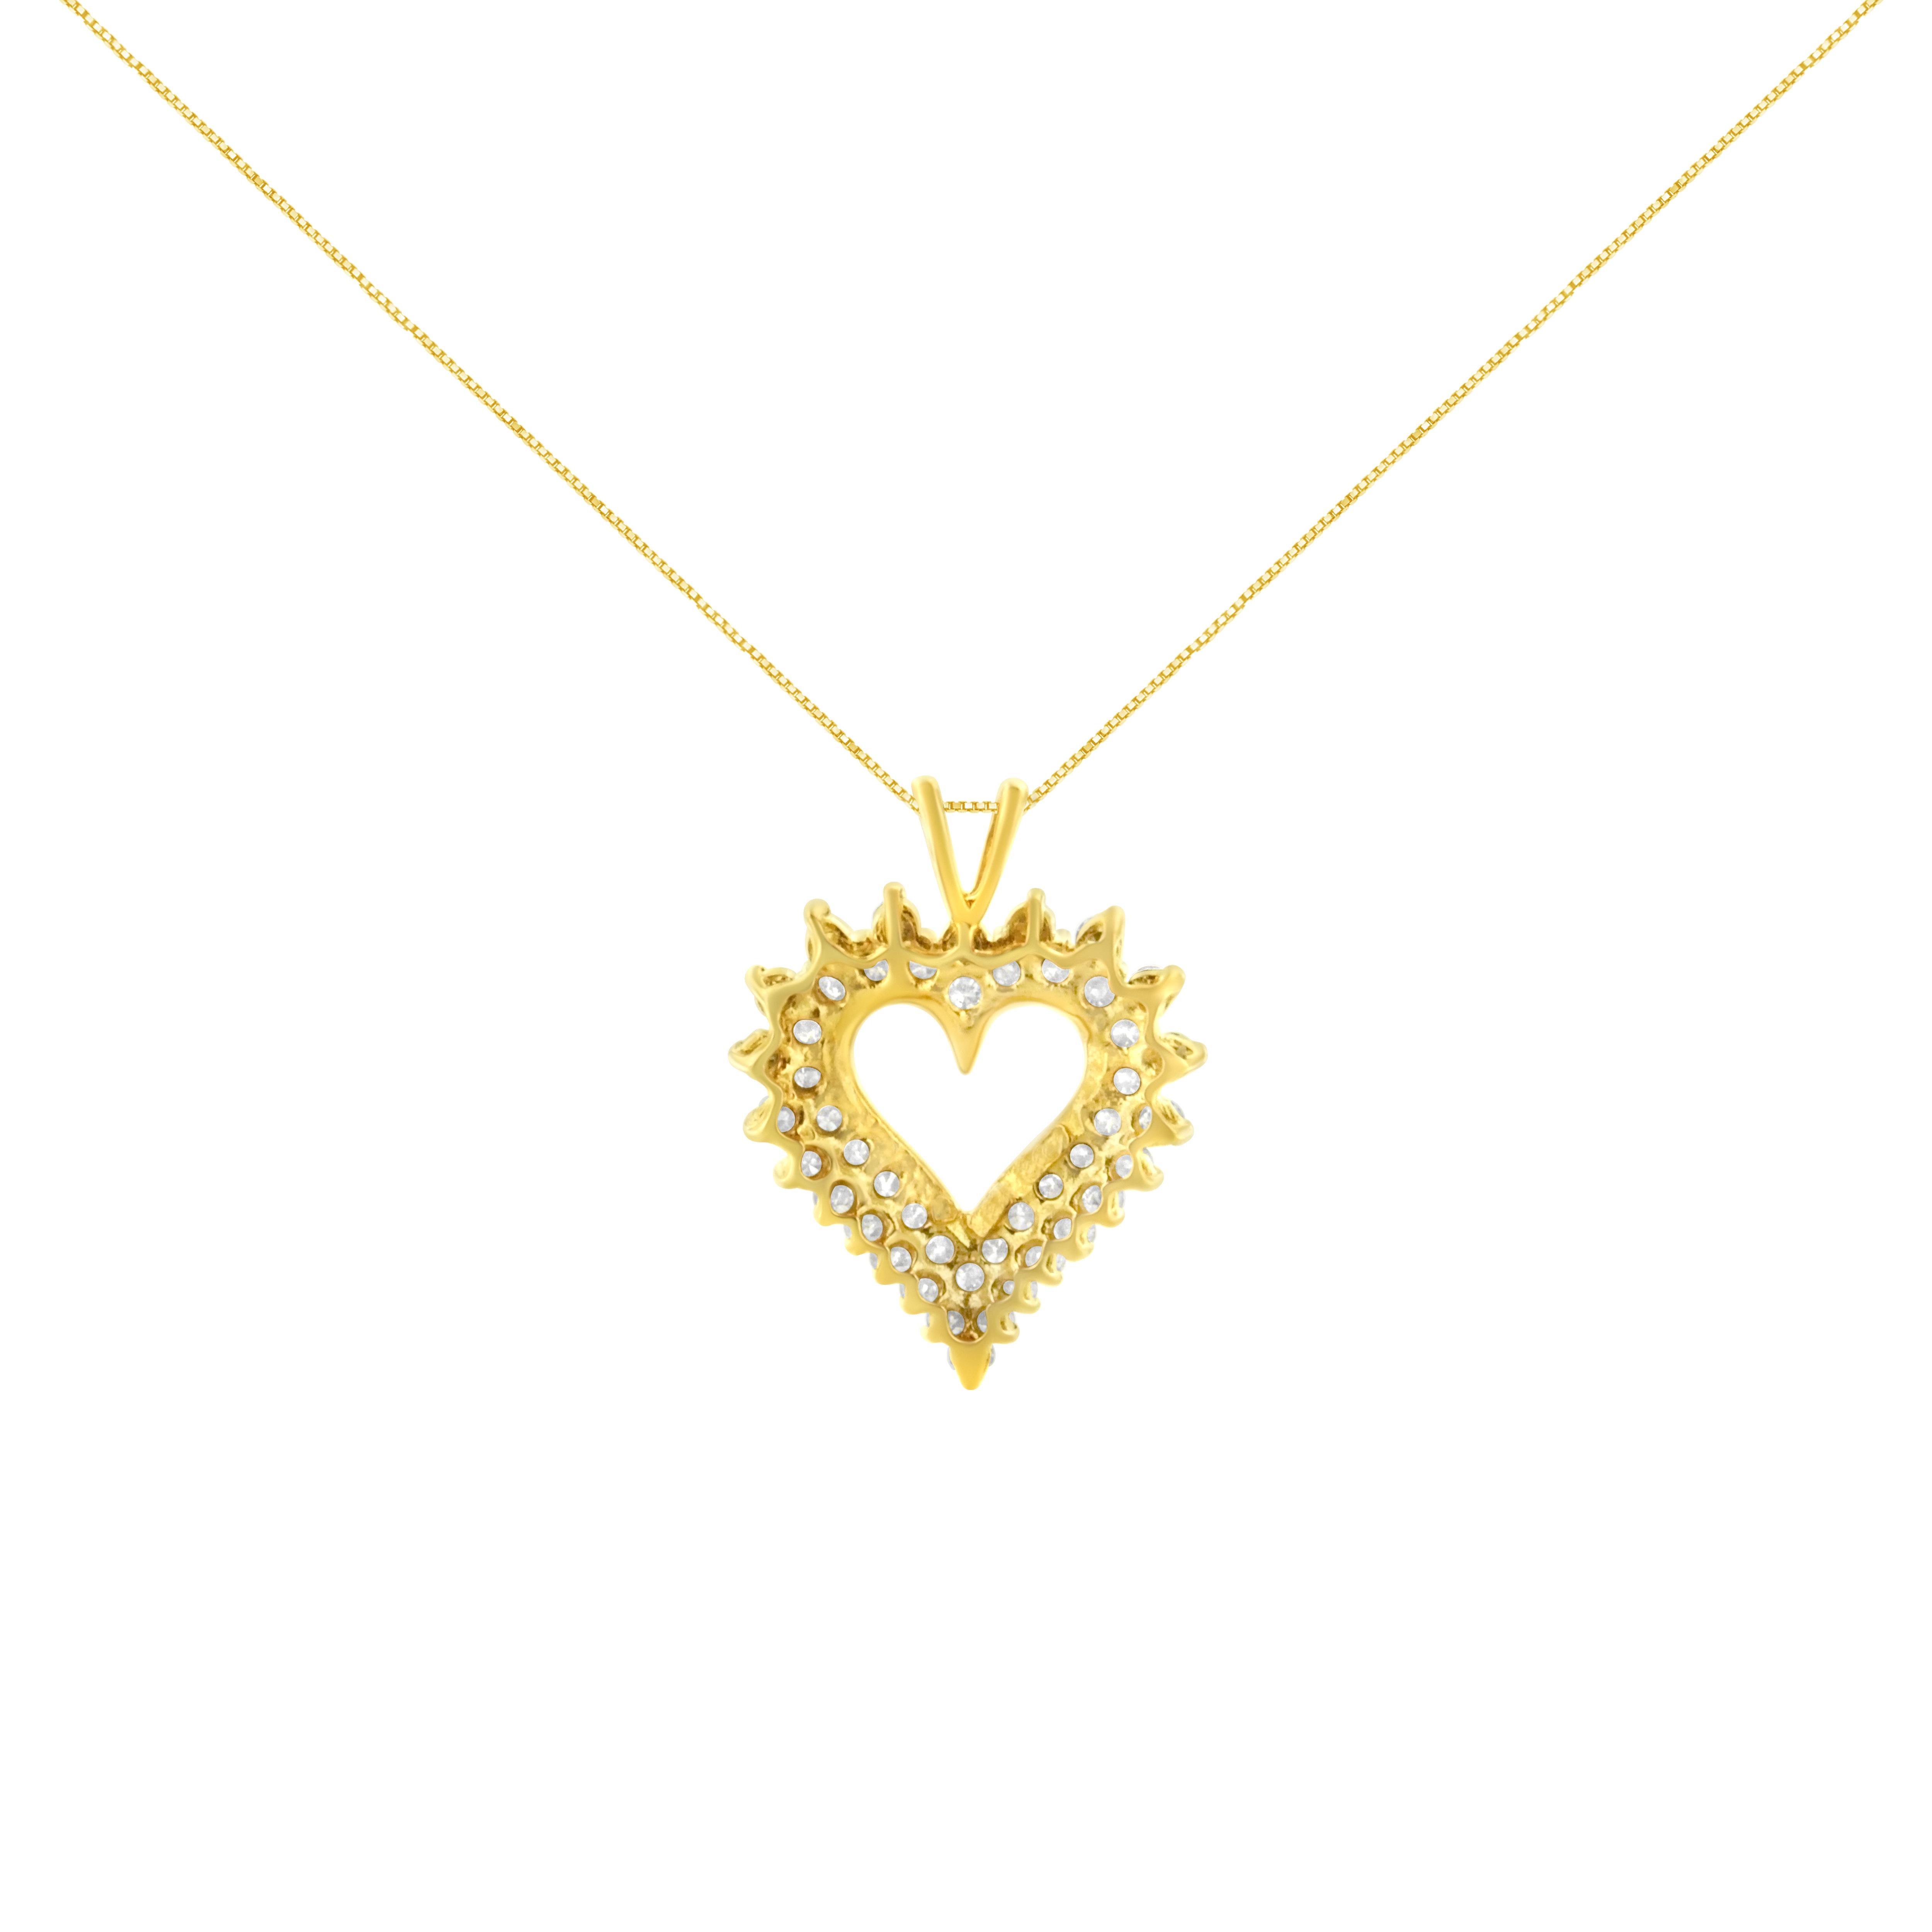 Two rows of natural, sparkling diamonds are set in warm 10K yellow gold to create a stunning open heart design in this beautiful pendant necklace for her. This pendant has 46 round diamonds, that are I1-I2 in clarity and J-K in color; each diamond